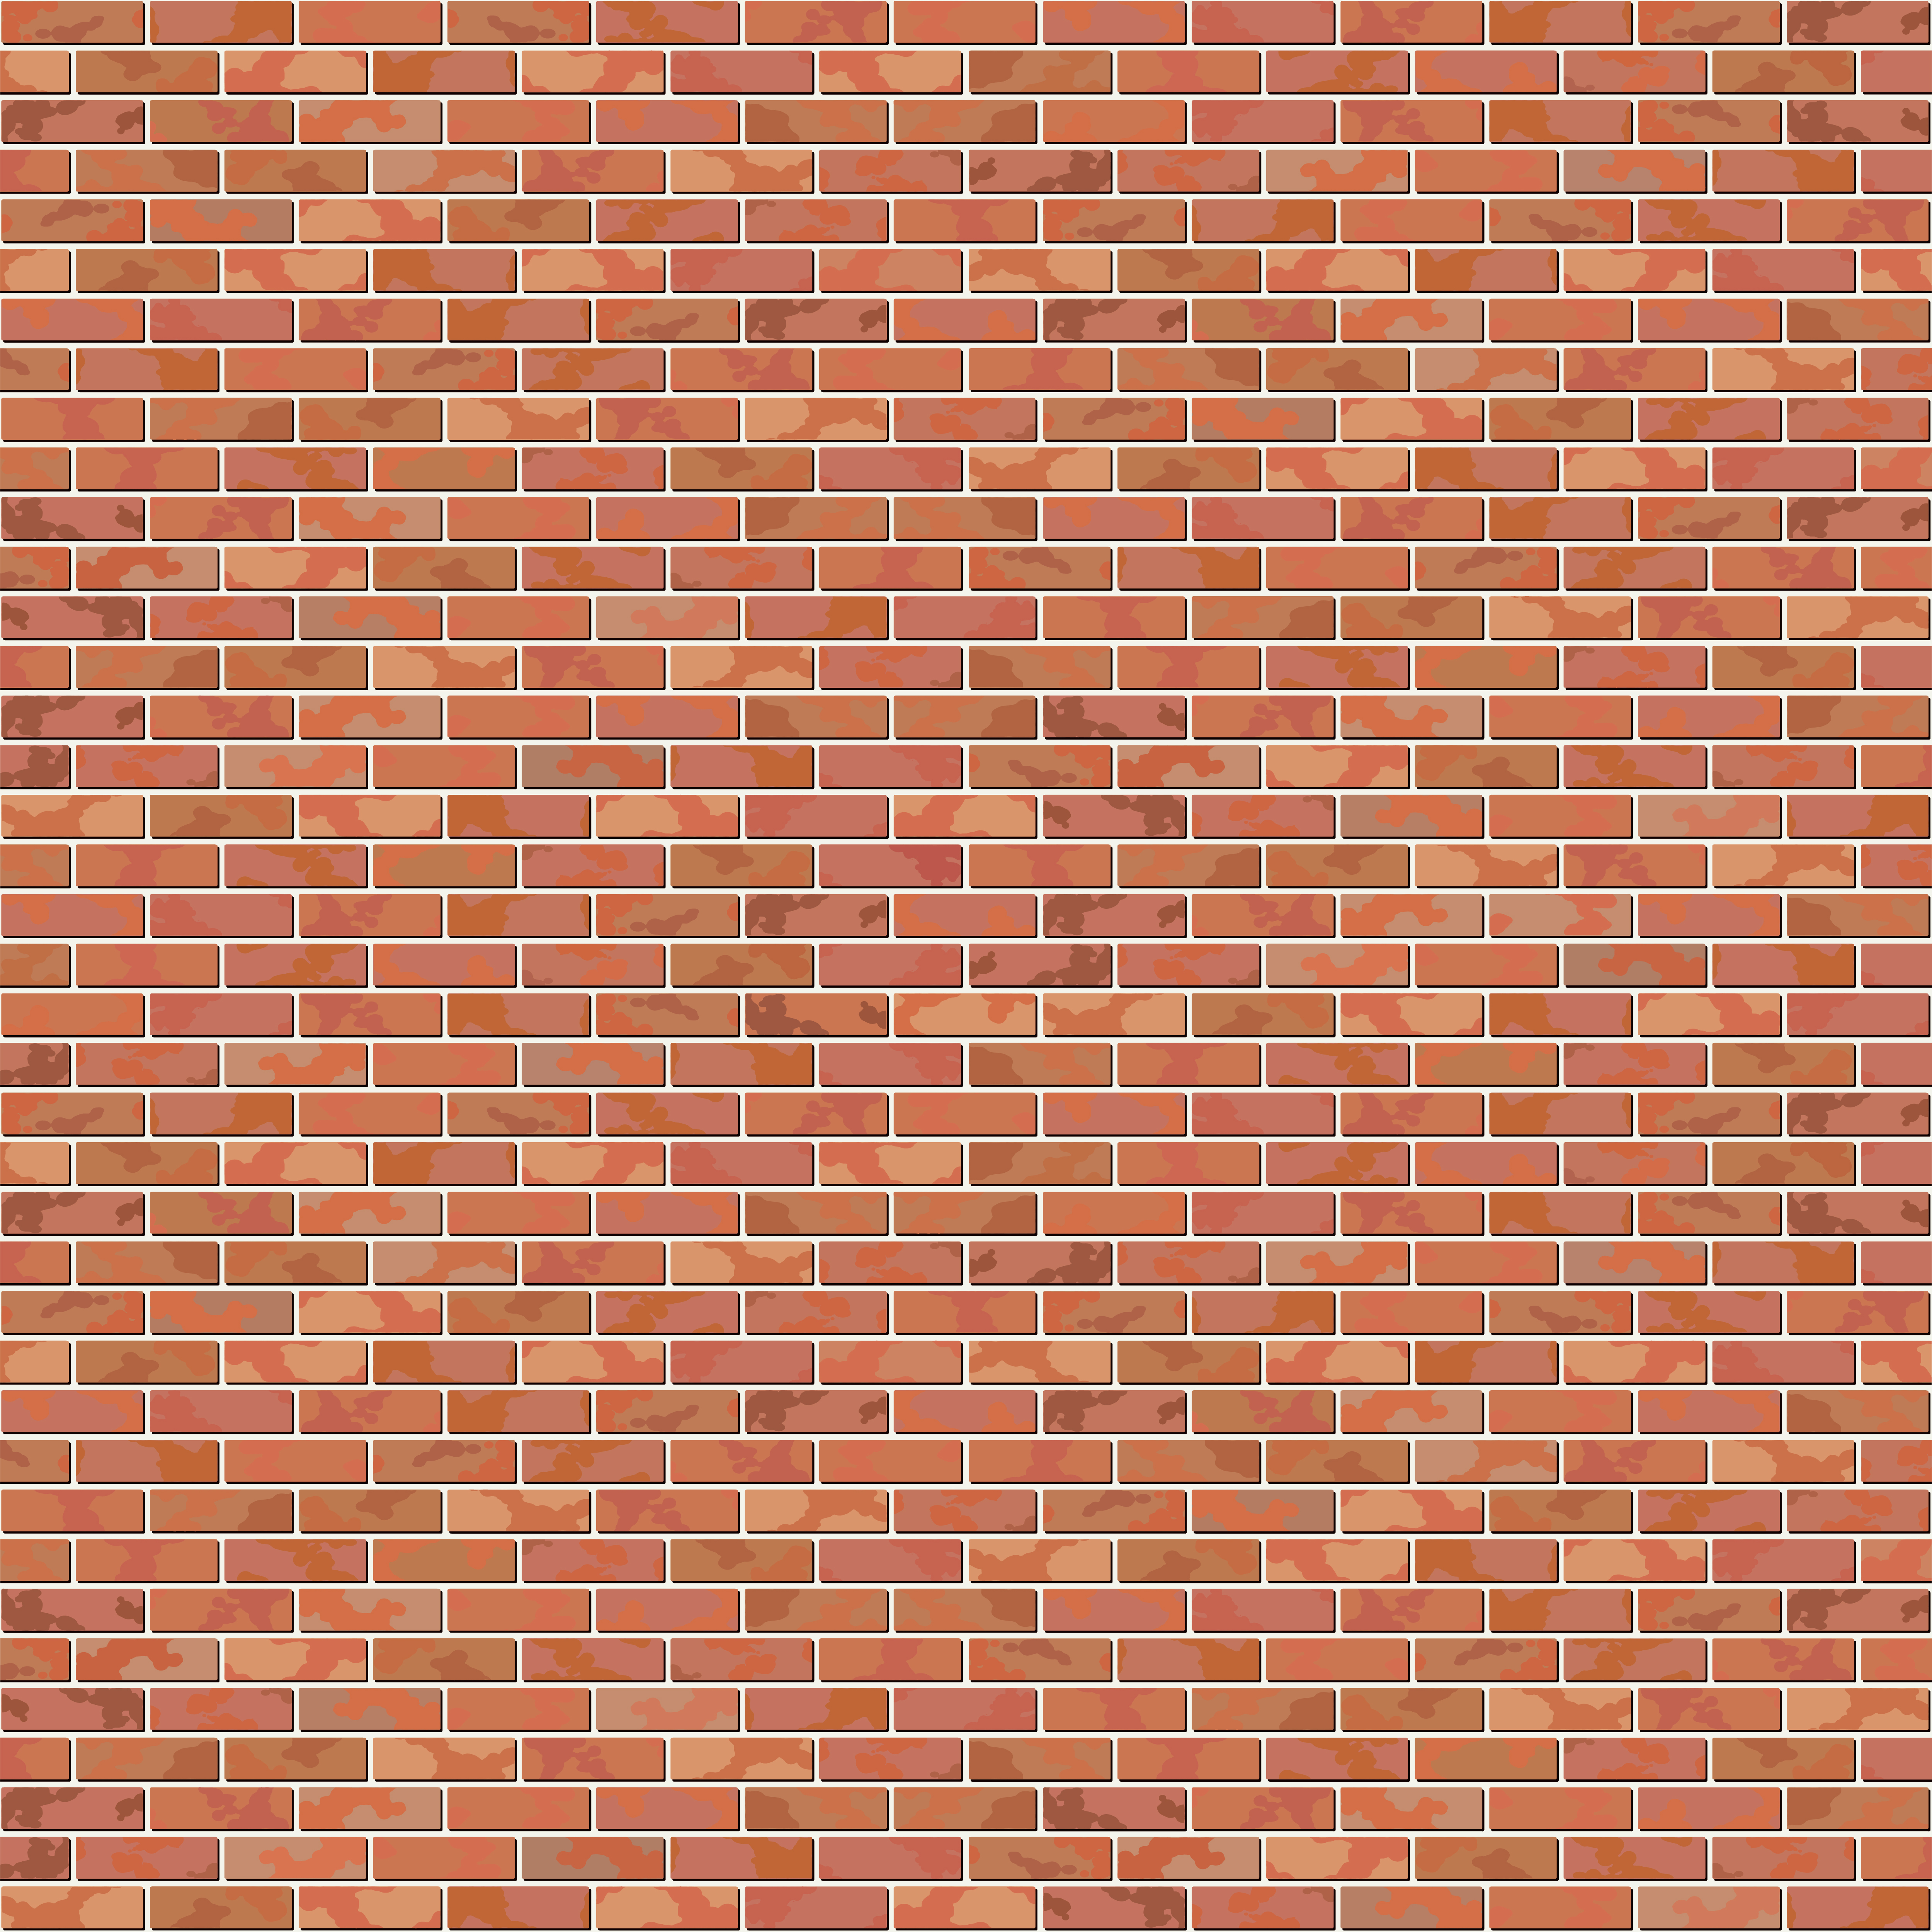 brick wallpaper red awesome